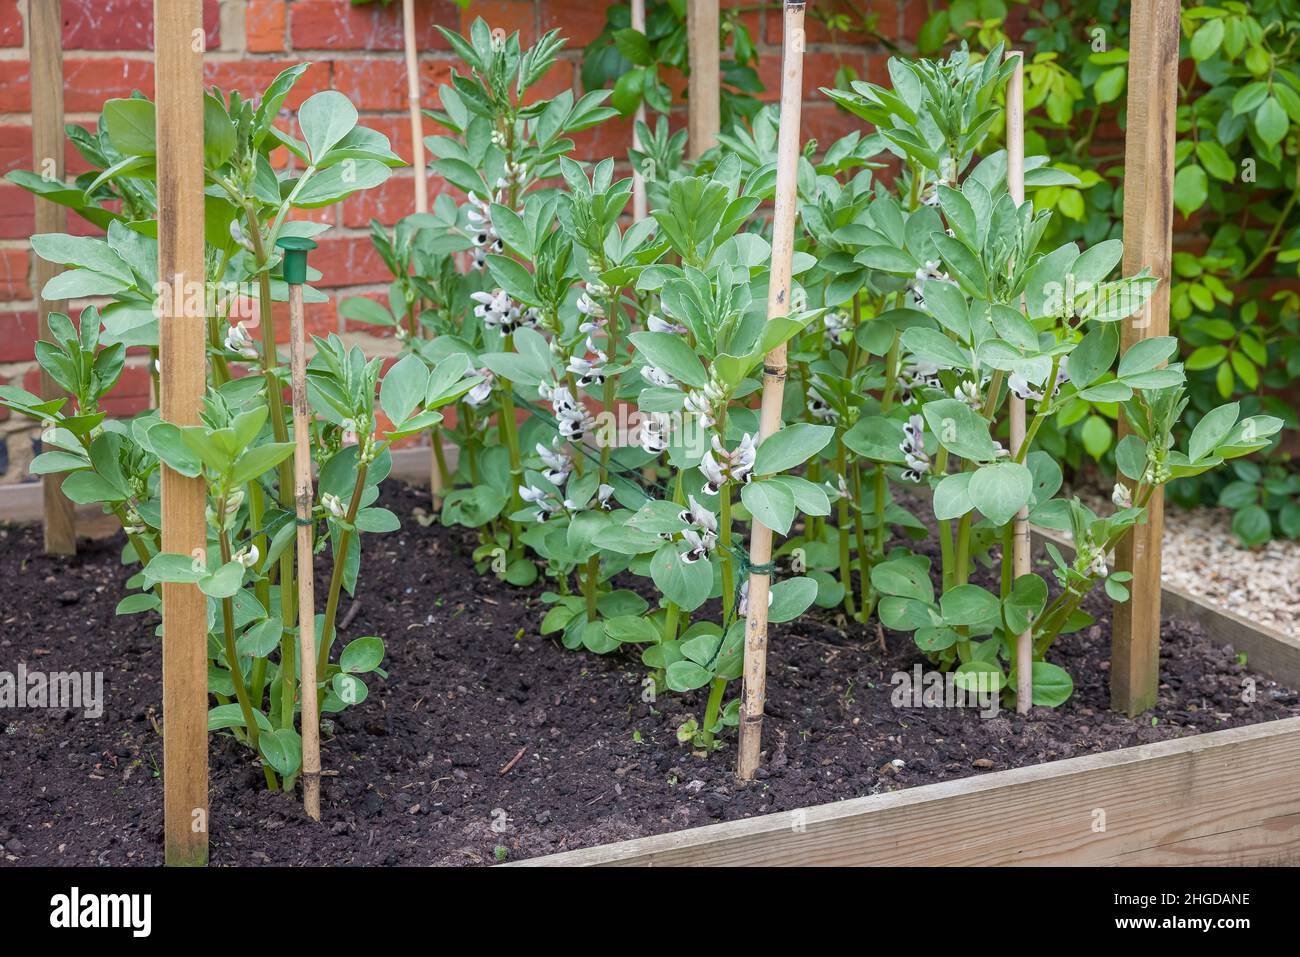 Broad beans, plants with flowers growing in a raised bed. English vegetable garden, UK Stock Photo